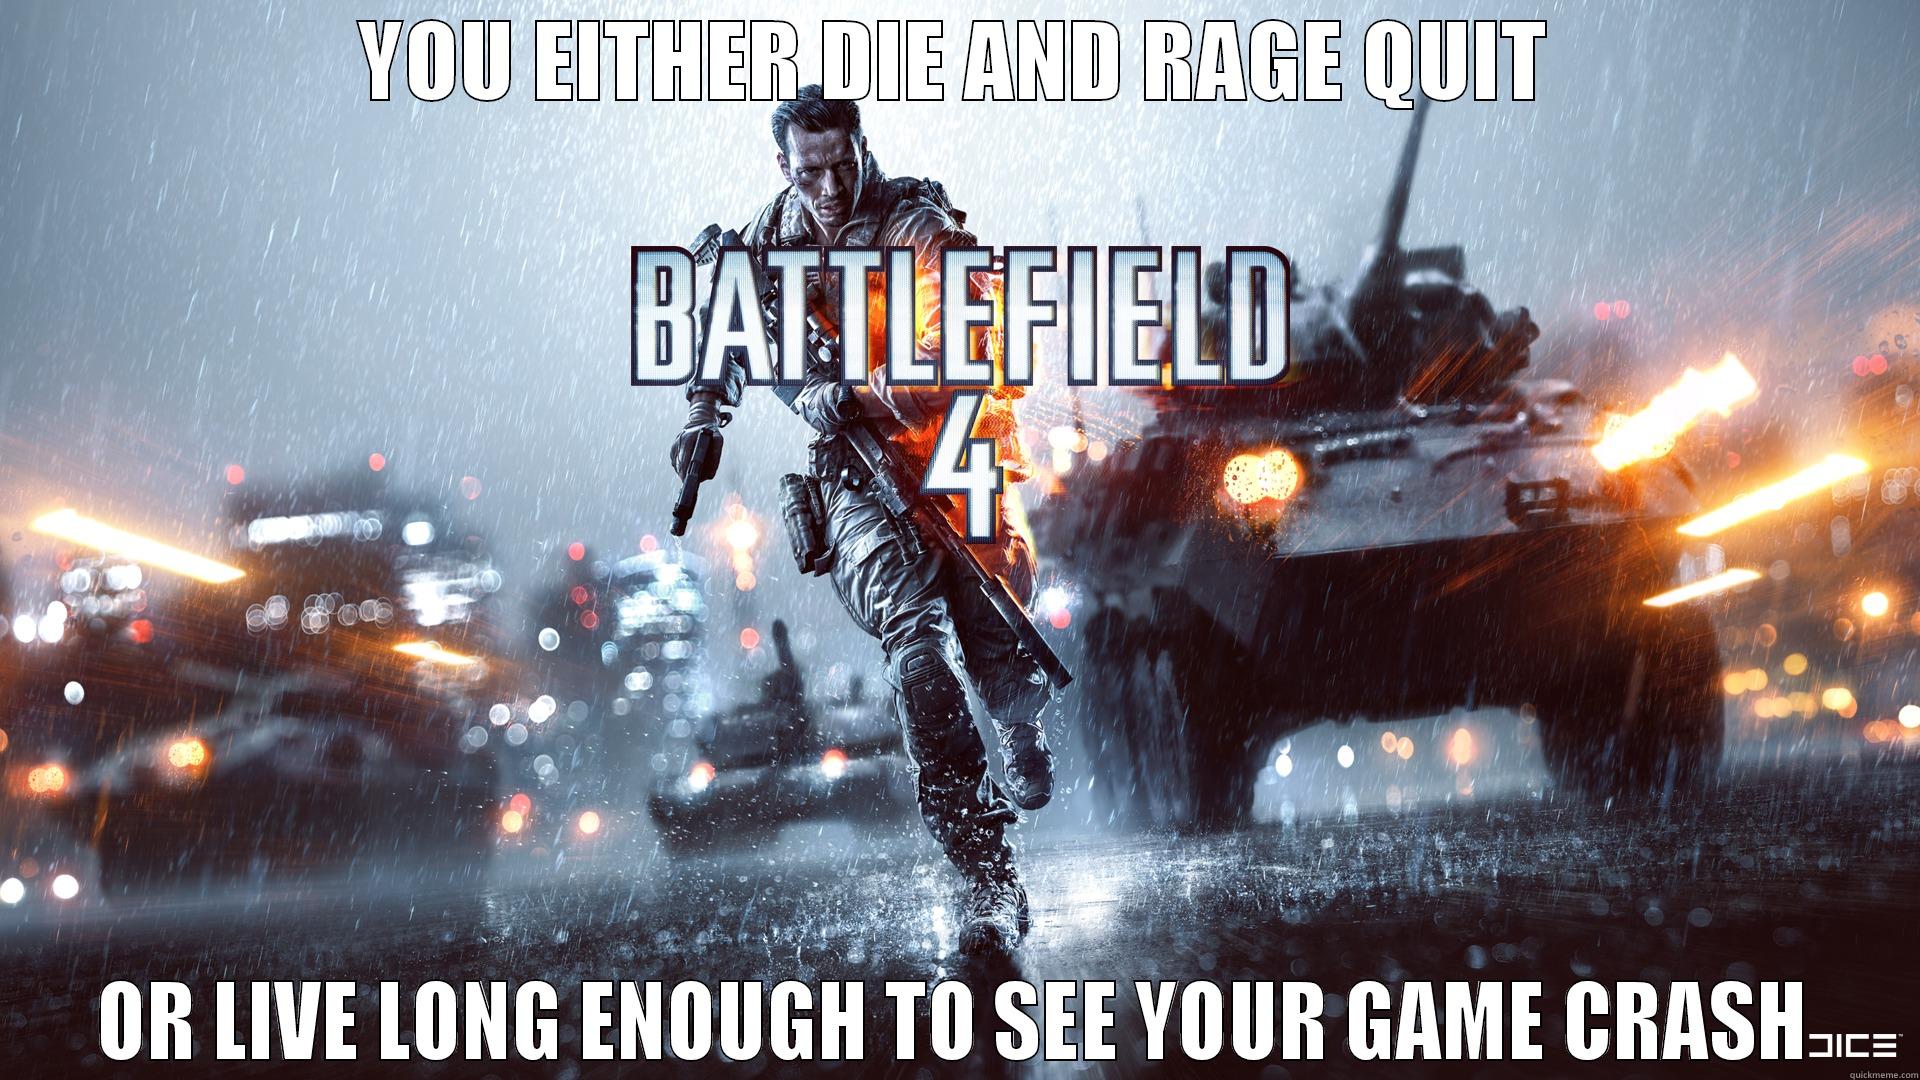 Battlefield 4 - YOU EITHER DIE AND RAGE QUIT OR LIVE LONG ENOUGH TO SEE YOUR GAME CRASH Misc